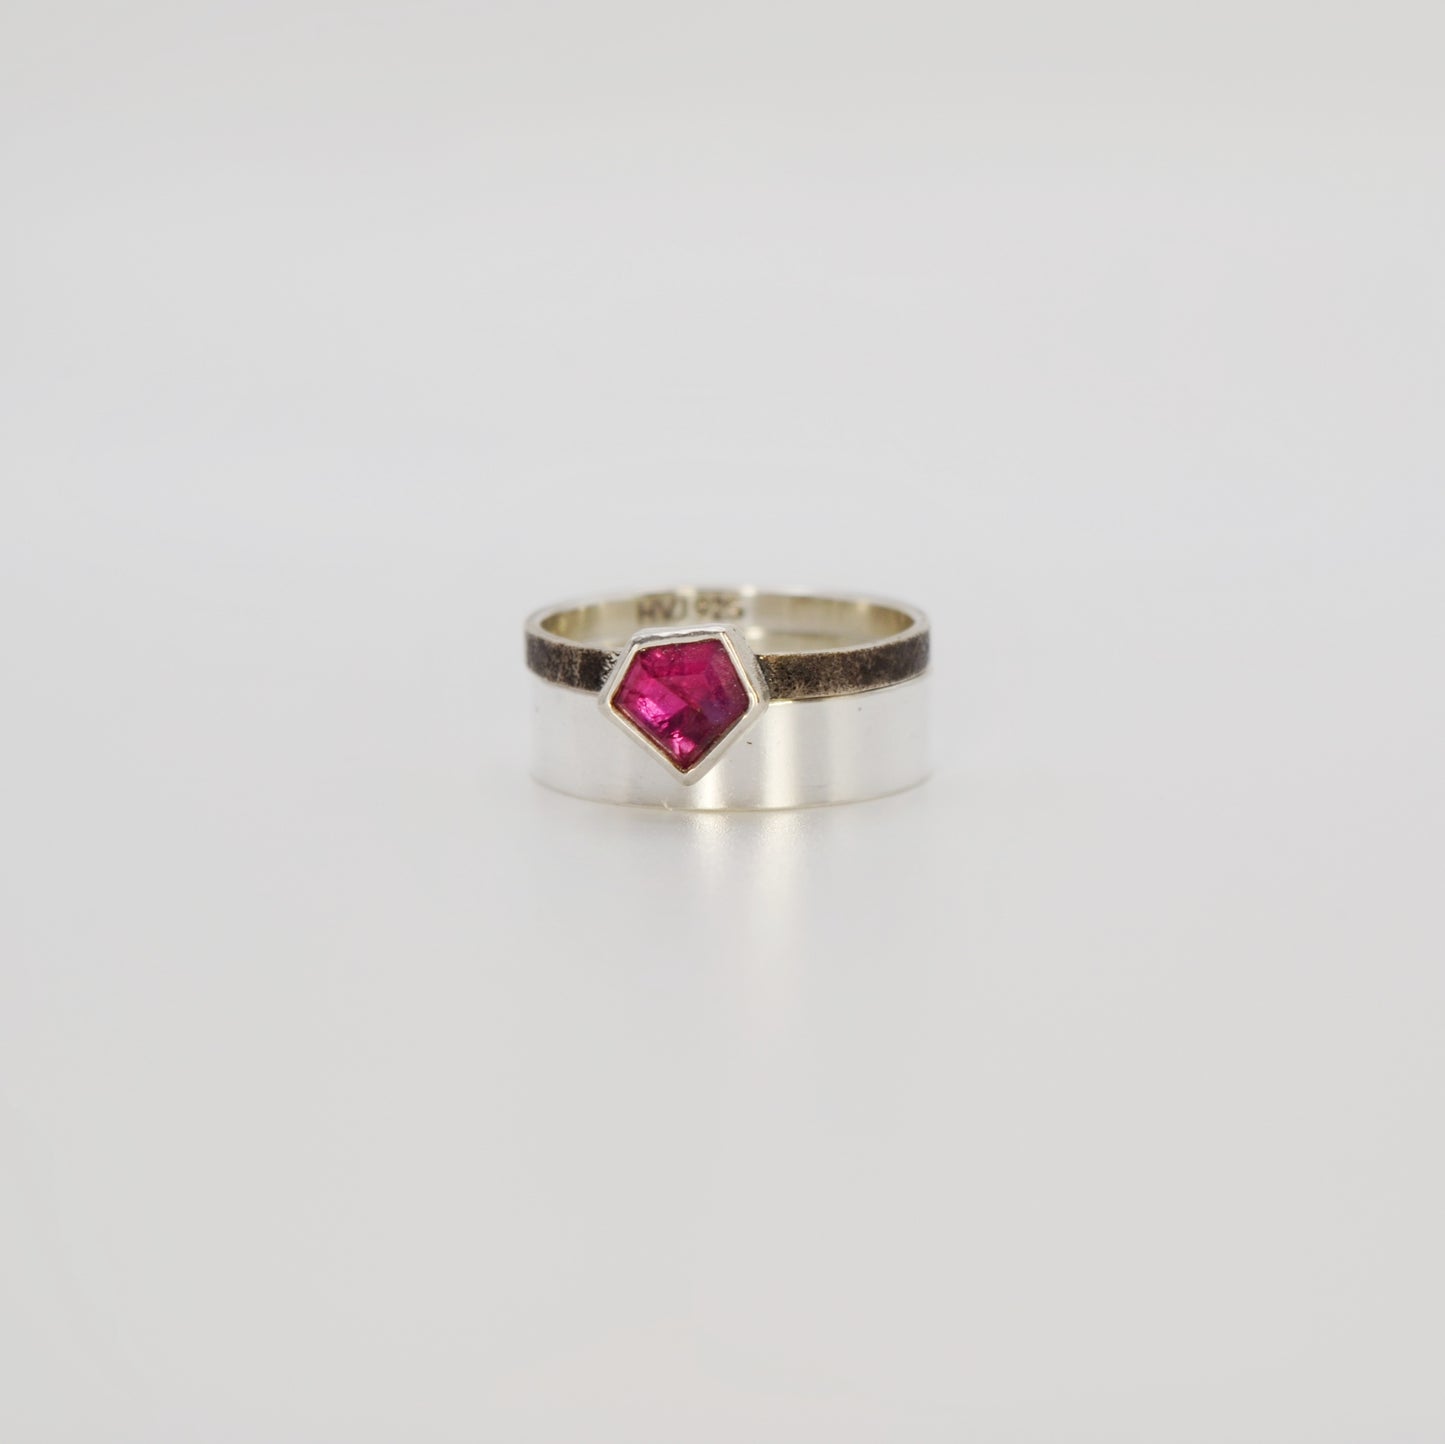 Pink Winza Sapphire, Natural Gemstone Ring, Sterling Silver, Antique Minimalist Inspired Ring Set, Textured Band, Size 7.5 U.S.